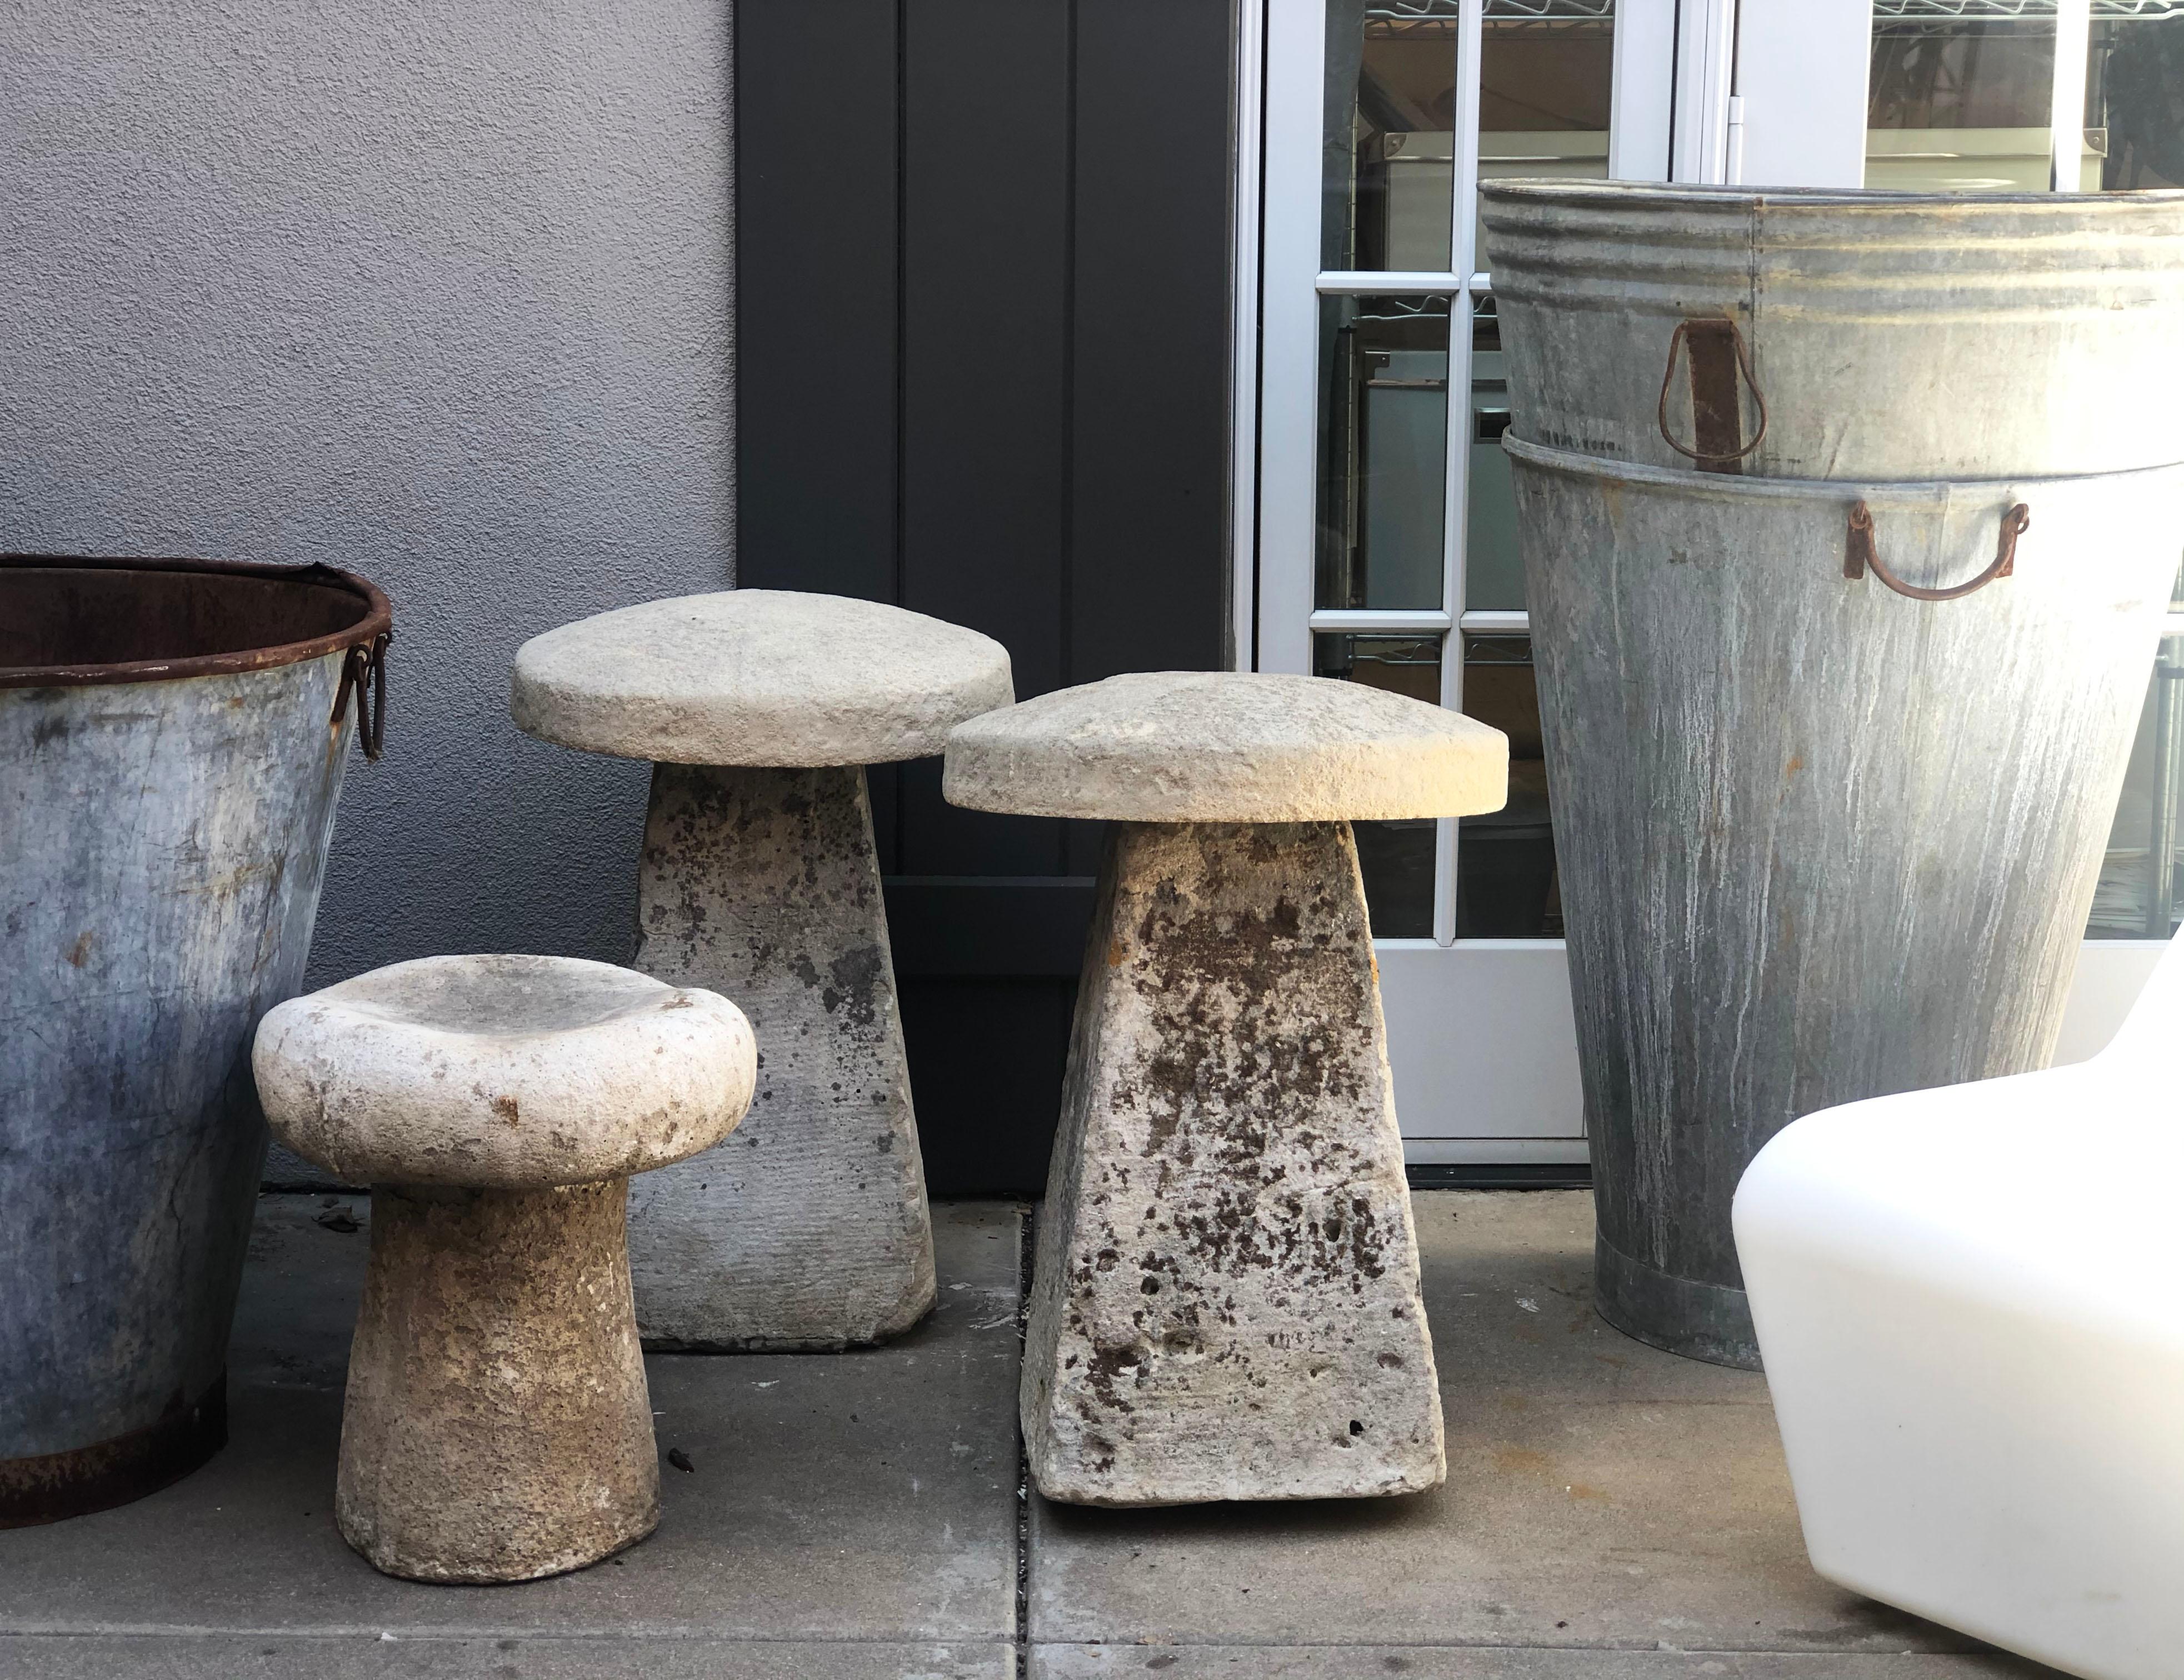 A large staddle stone. English mushroom form. wonderful for garden art sculpture and planting areas. Charming and full of history. staddle stones are remnants of the past that have remained interesting as sculpture today. . Mainly dating from the